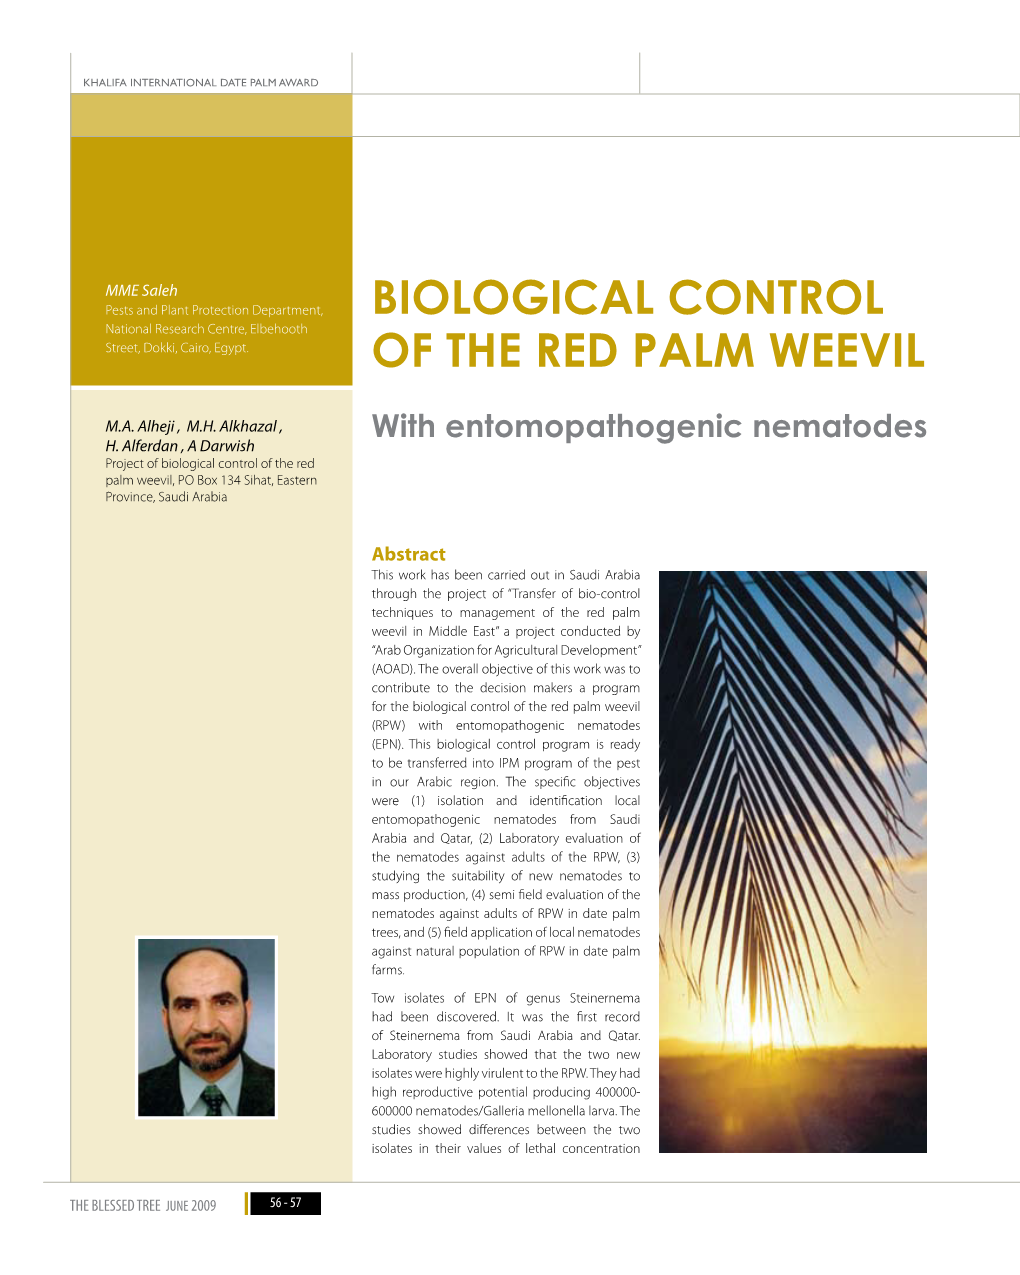 Biological Control of the Red Palm Weevil, PO Box 134 Sihat, Eastern Province, Saudi Arabia